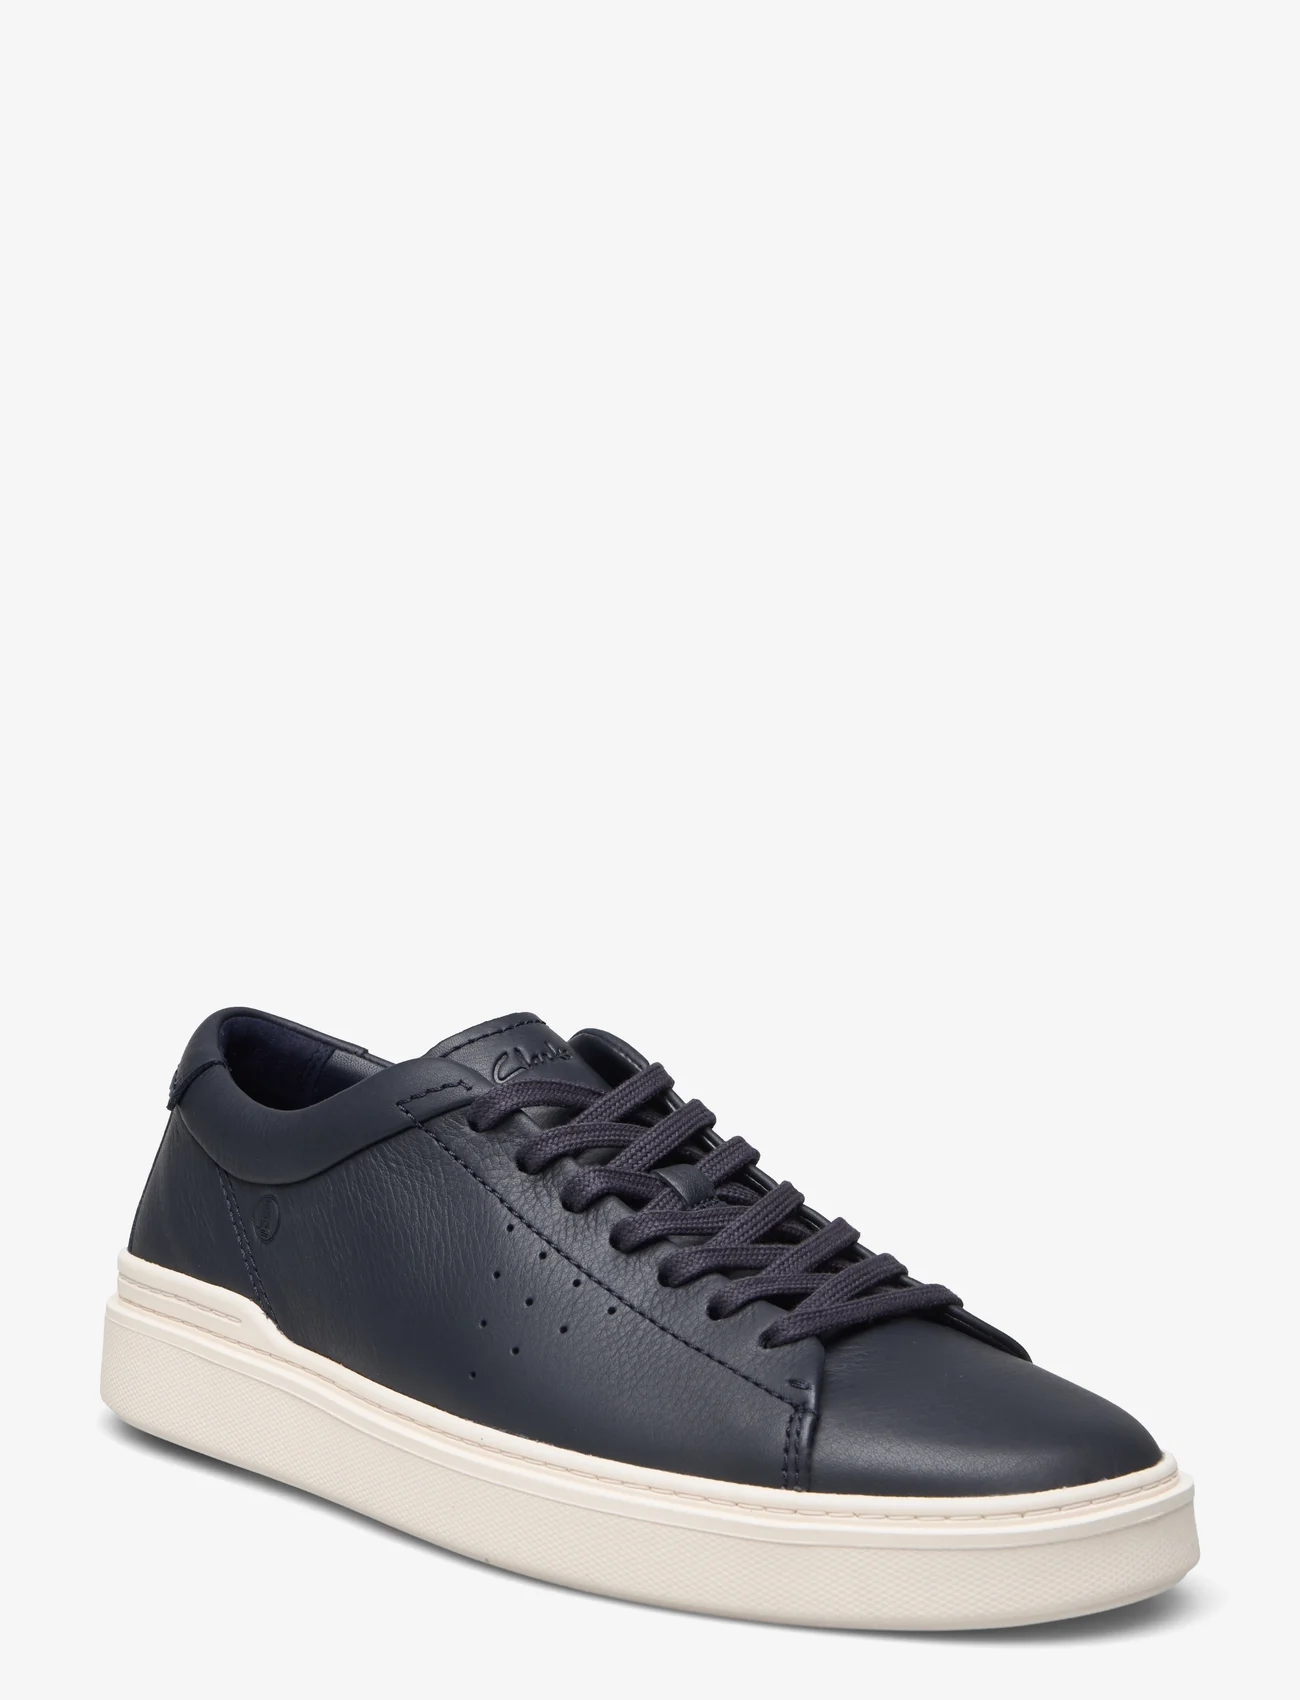 Clarks - Craft Swift G - baskets basses - 2248 navy leather - 0